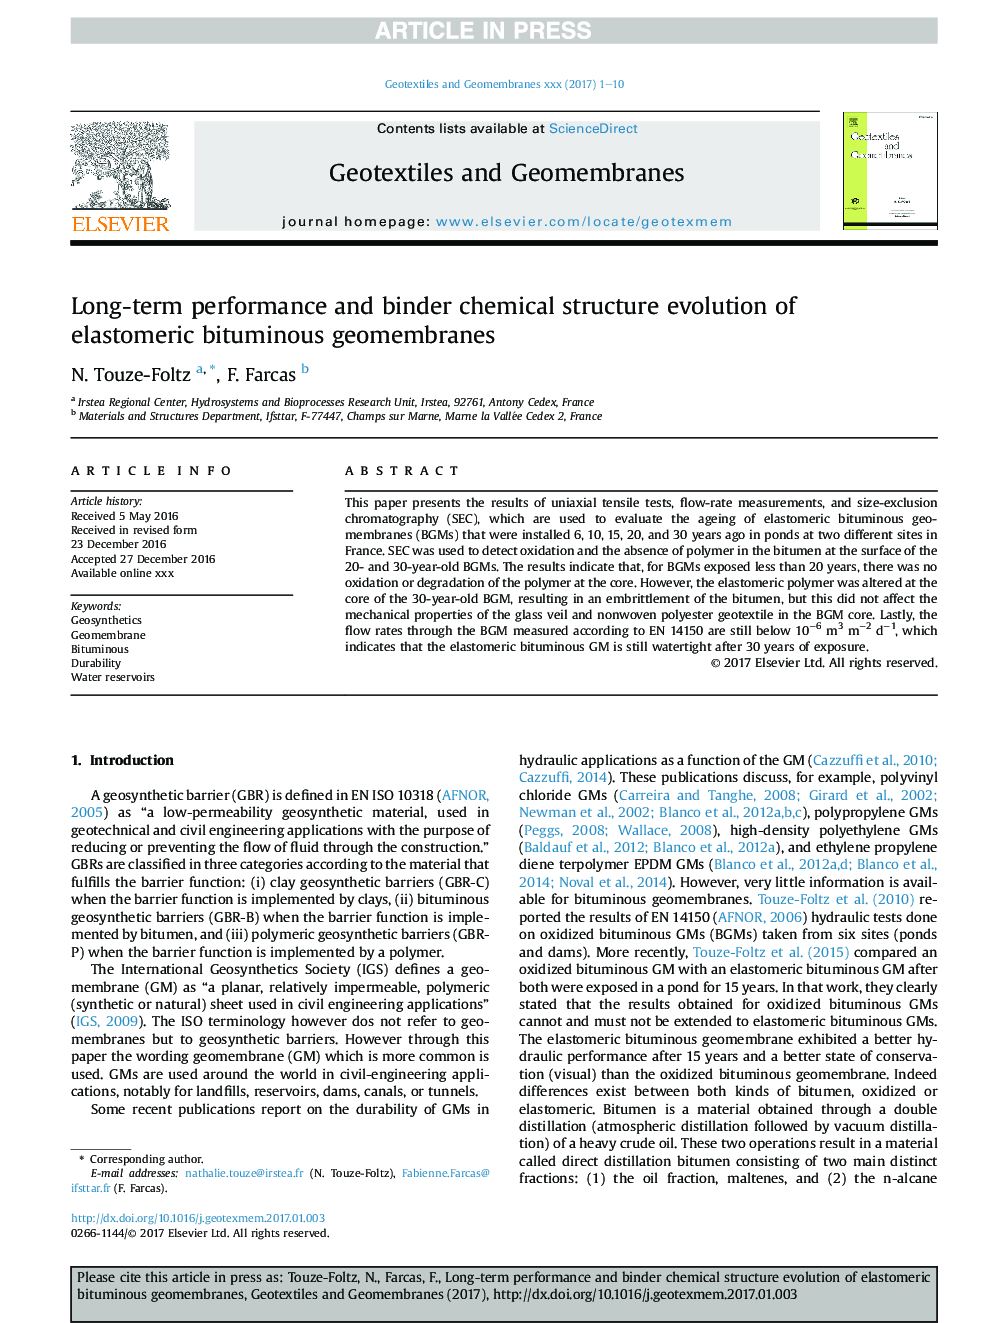 Long-term performance and binder chemical structure evolution of elastomeric bituminous geomembranes